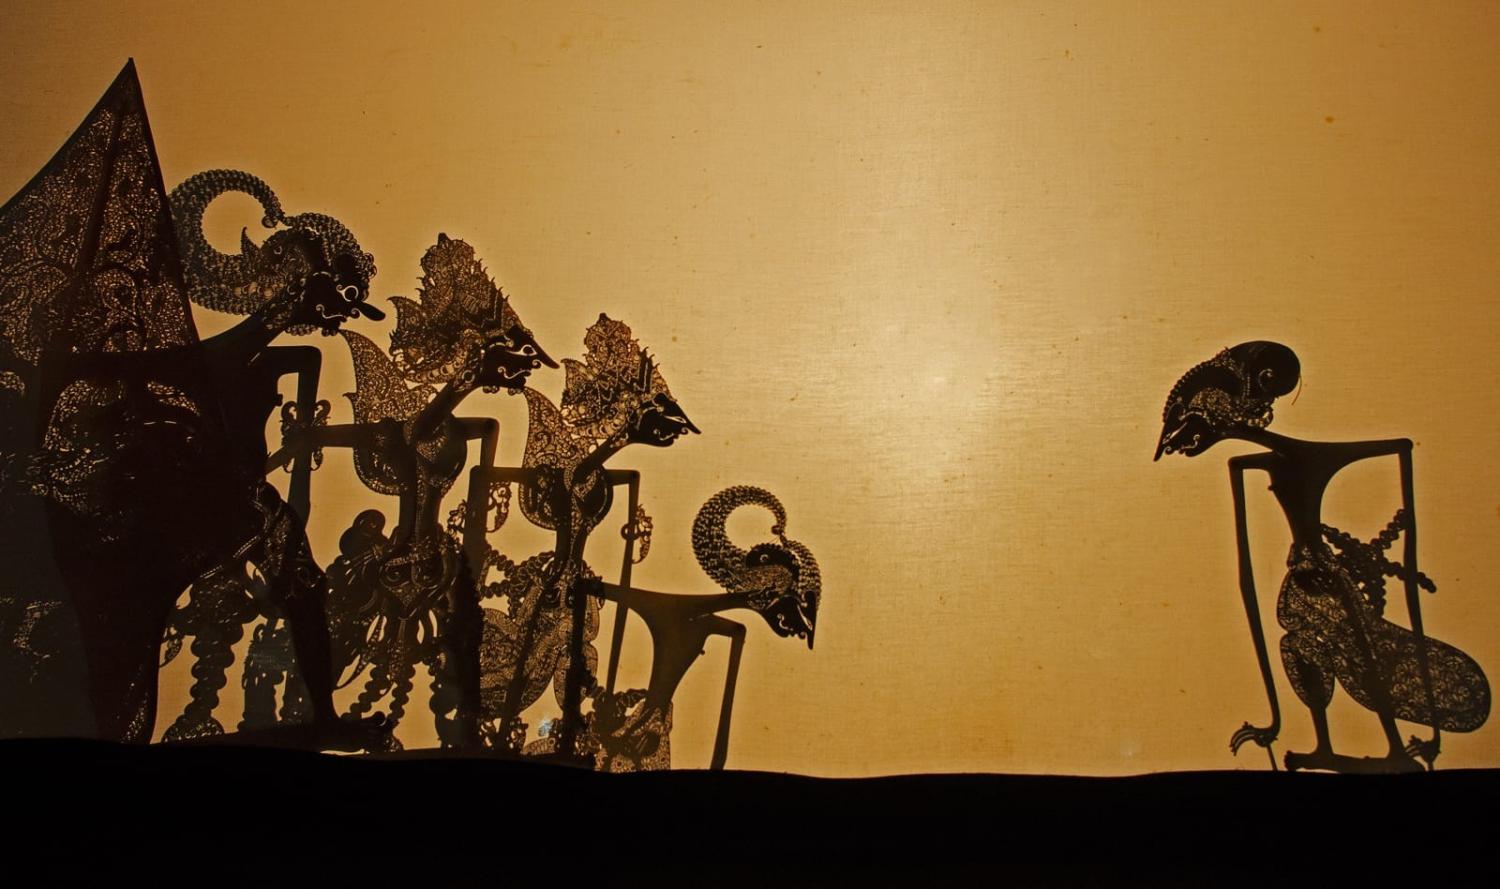 A shadow puppet show, or Wayang, one of the highlights of Javanese culture (Afrianto Silalahi via Getty Images)